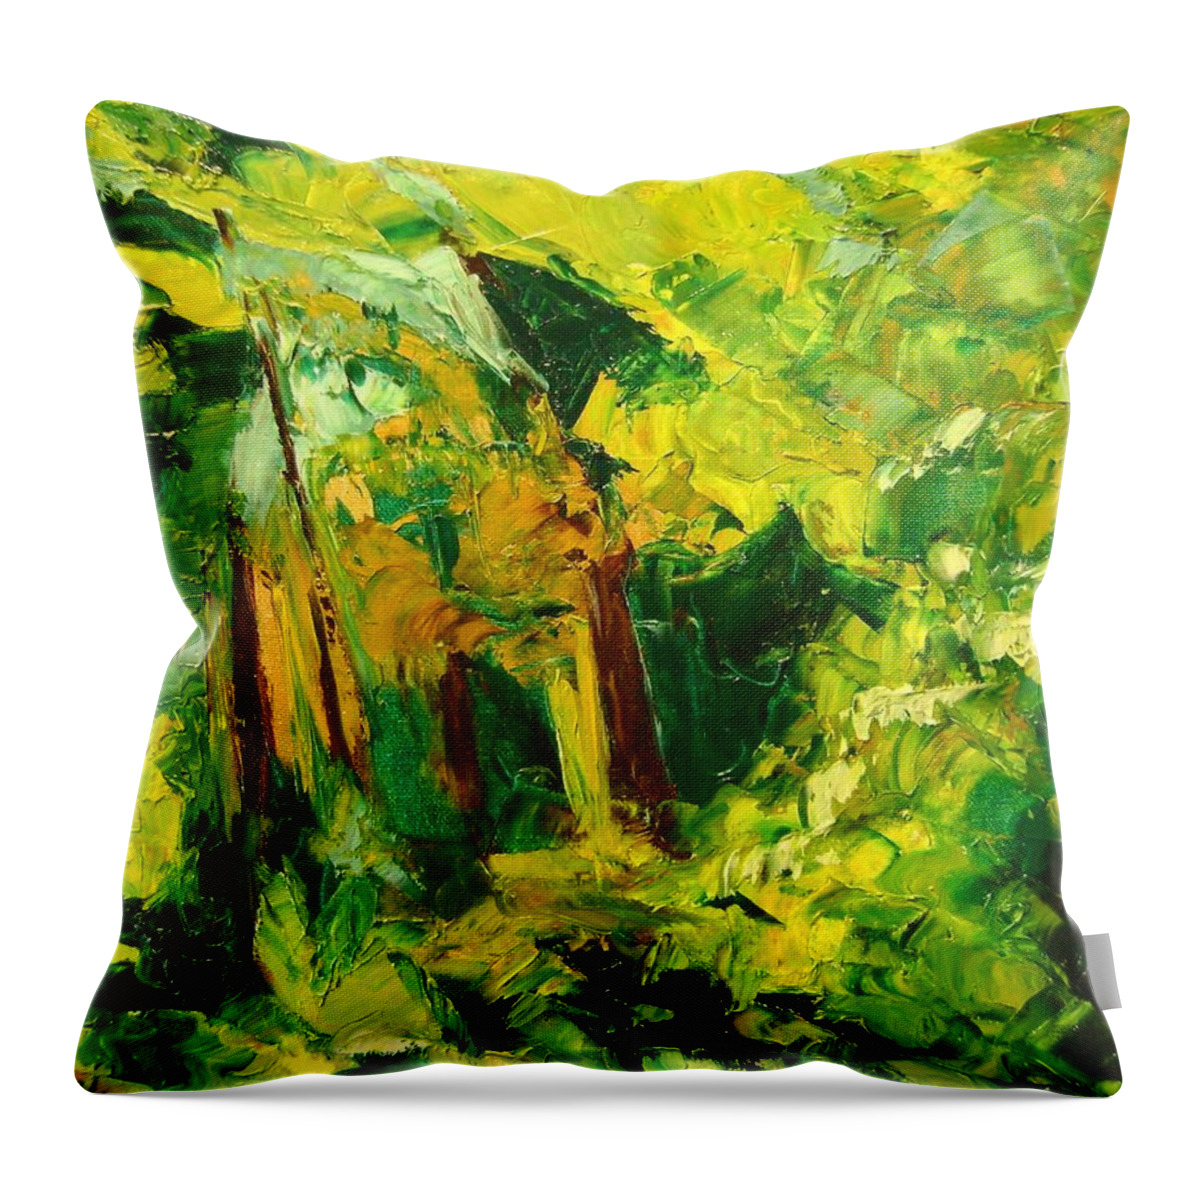 Enchanted Forest Throw Pillow featuring the painting Enchanted Forest by Therese Legere